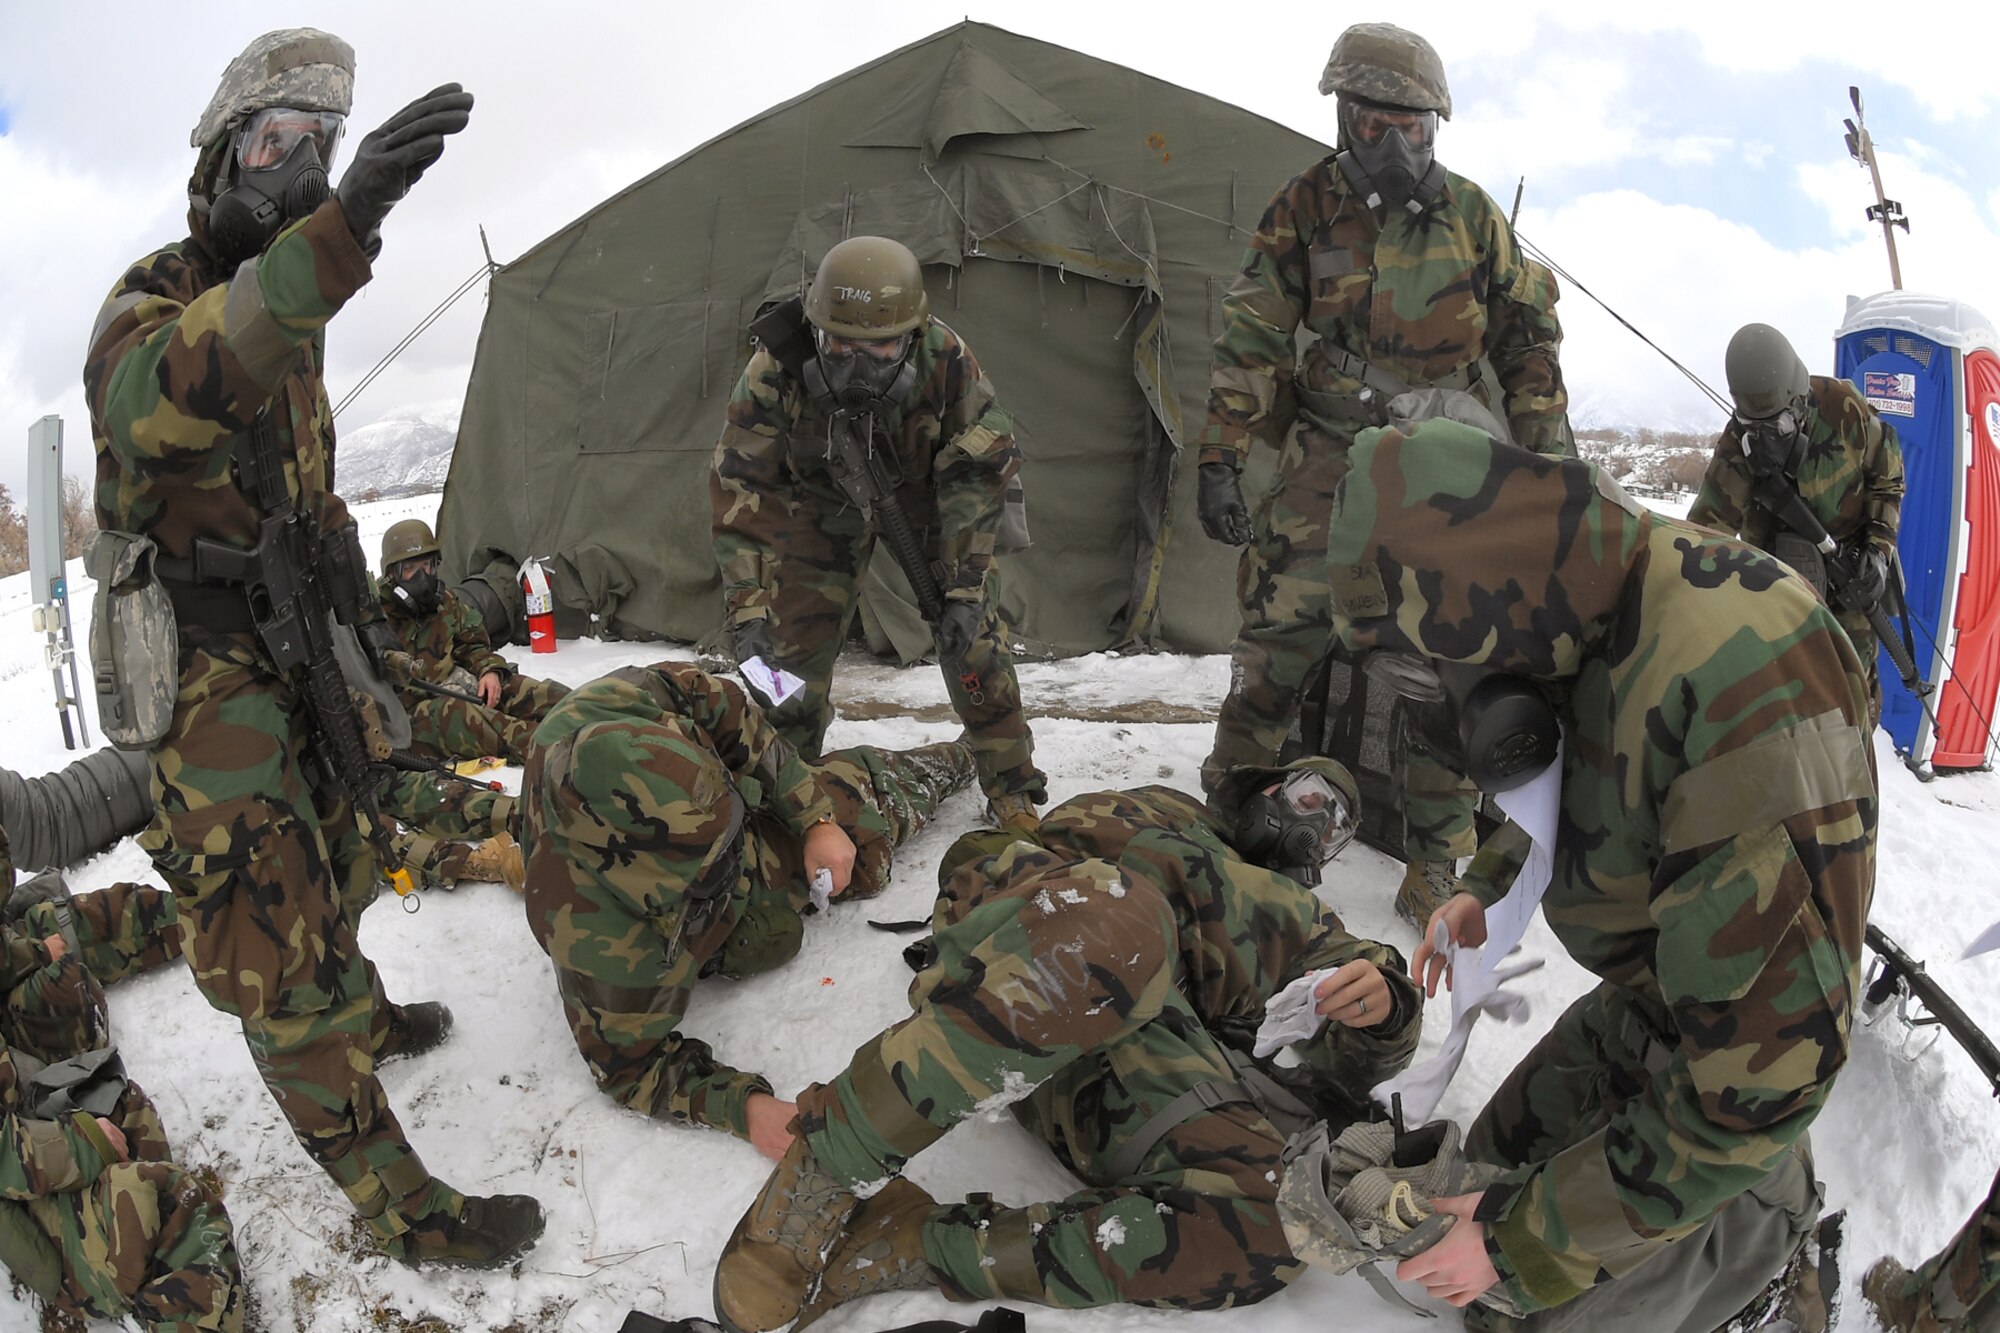 Airmen attend to patients with simulated injuries during a readiness exercise, Feb. 7, 2019, at Hill Air Force Base, Utah. During the exercise, Airmen donned mission-oriented projective posture, or MOPP, gear and were assessed on performing different tasks in a simulated toxic environment to improve their operational readiness.  (U.S. Air Force photo by Todd Cromar)